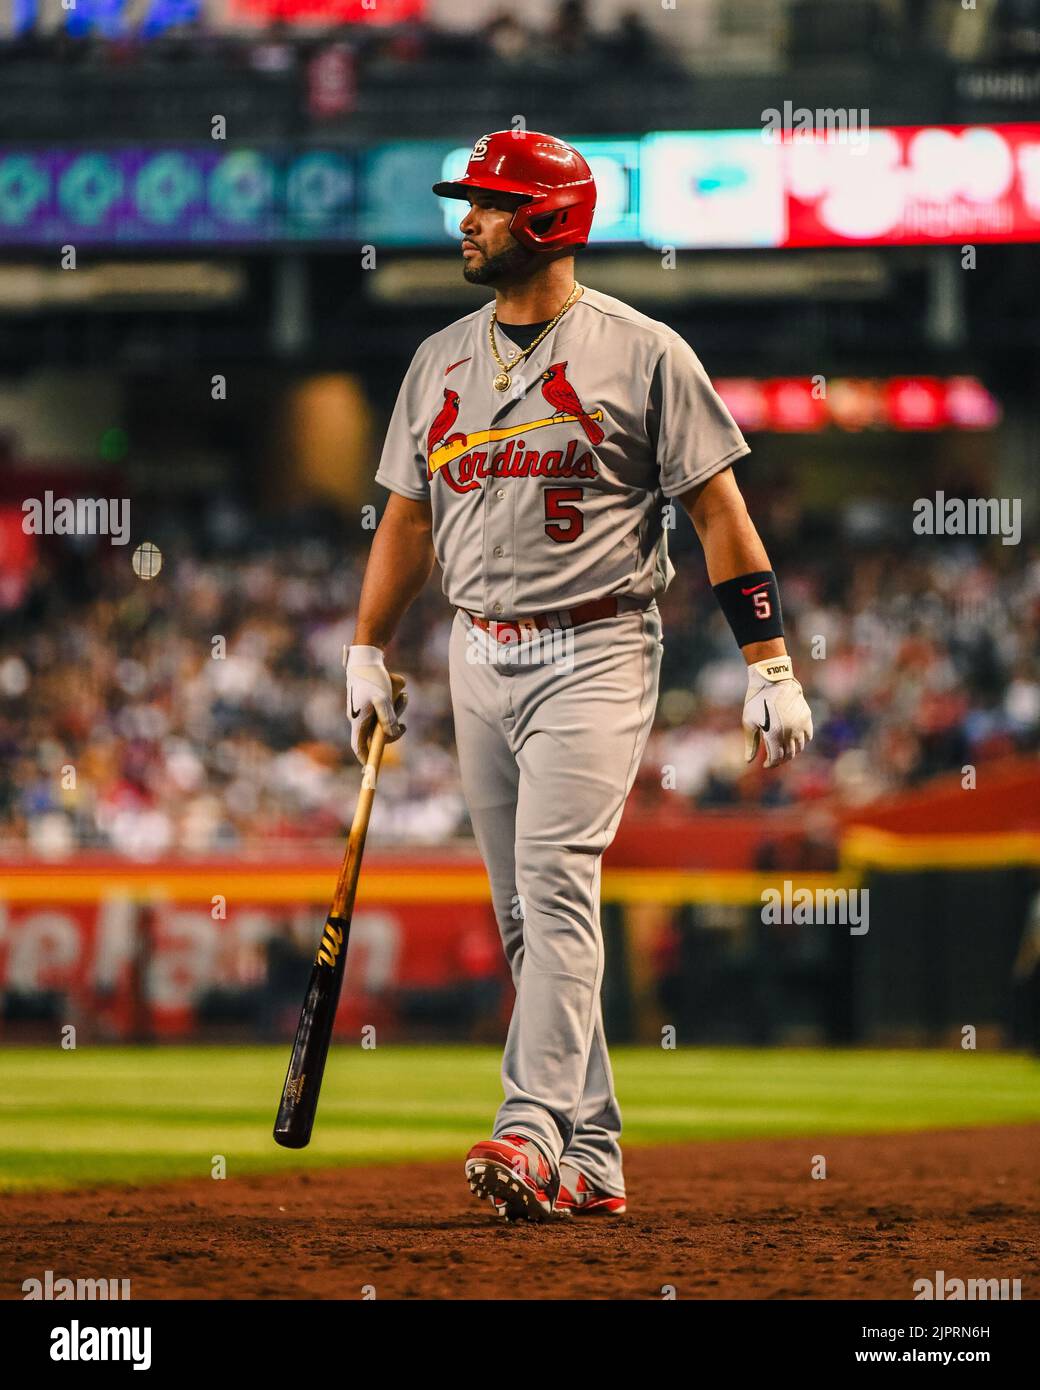 St. Louis Cardinals designated hitter Albert Pujols (5) walks towards the plate after a pitching change in the seventh inning of an MLB game against t Stock Photo